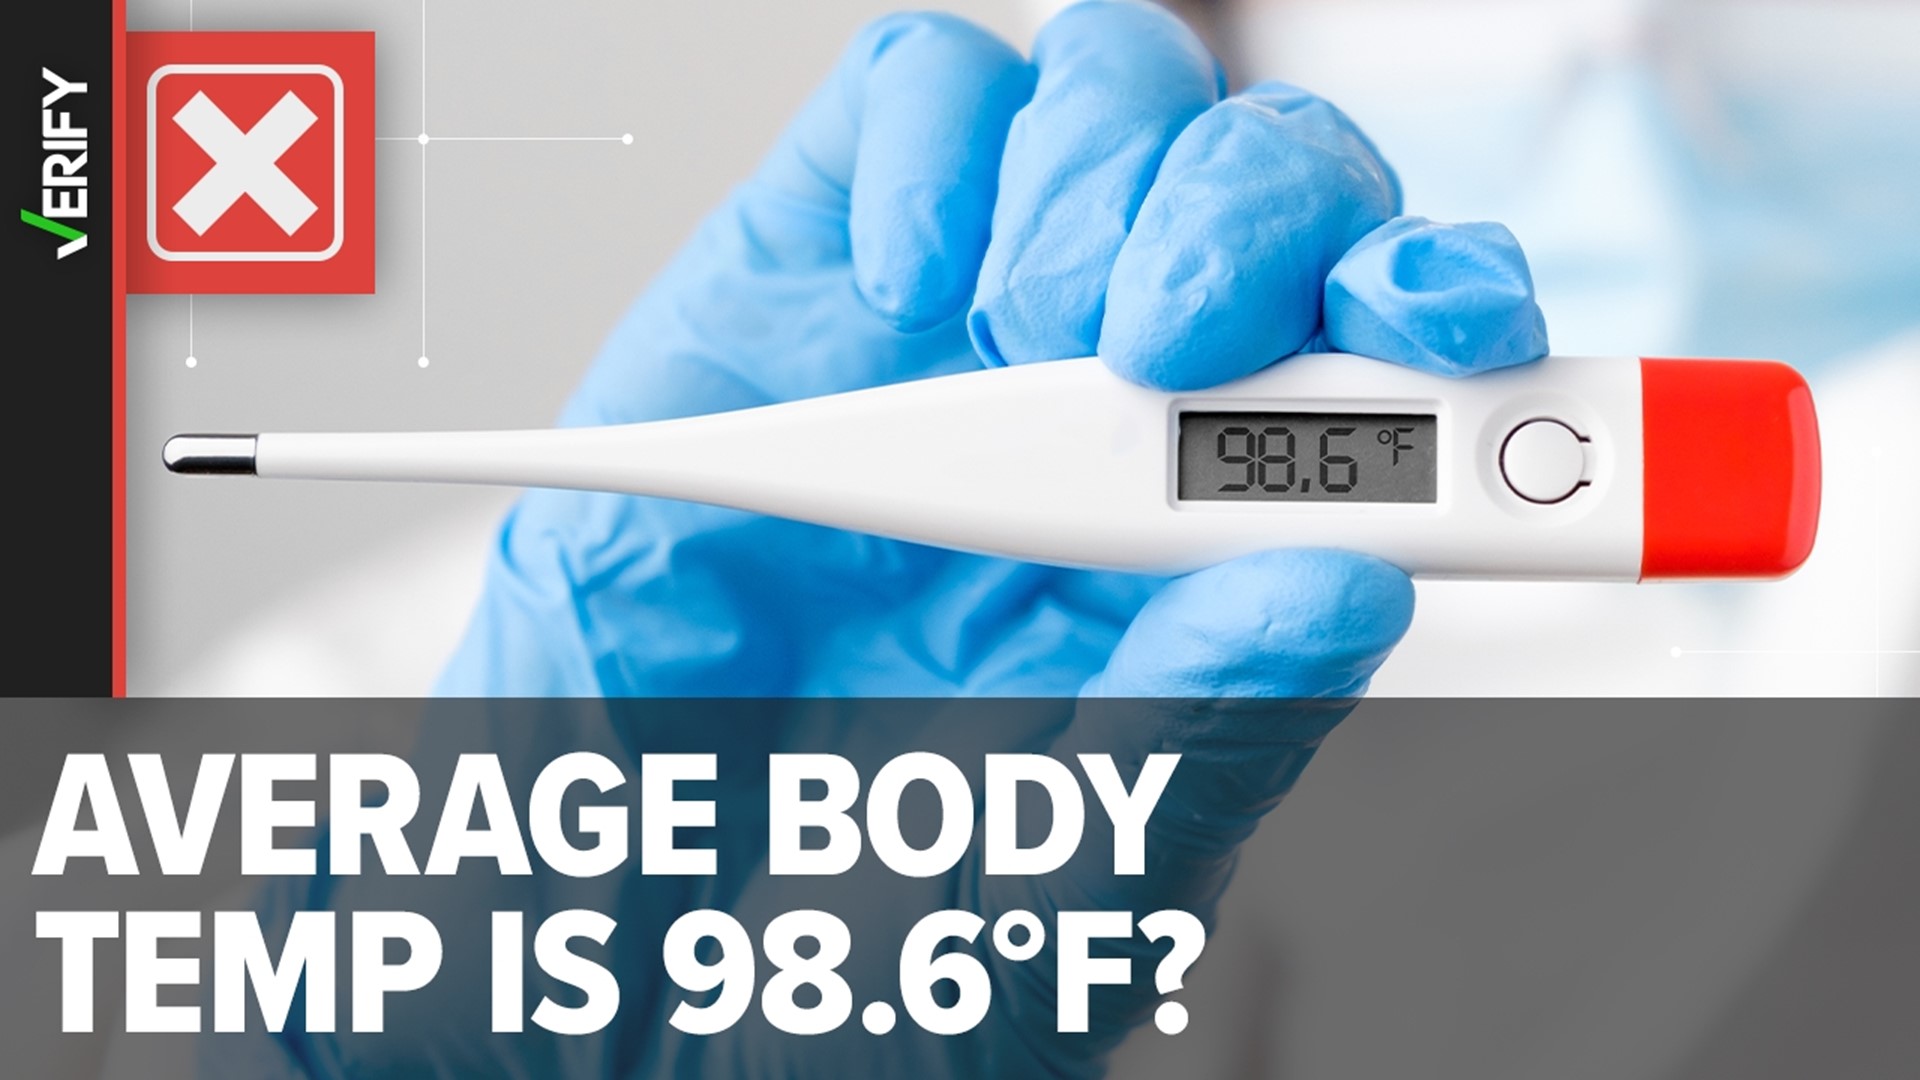 Studies have found the average body temperature is actually below 98.6 degrees. A normal temperature also varies based on factors like your age and health.